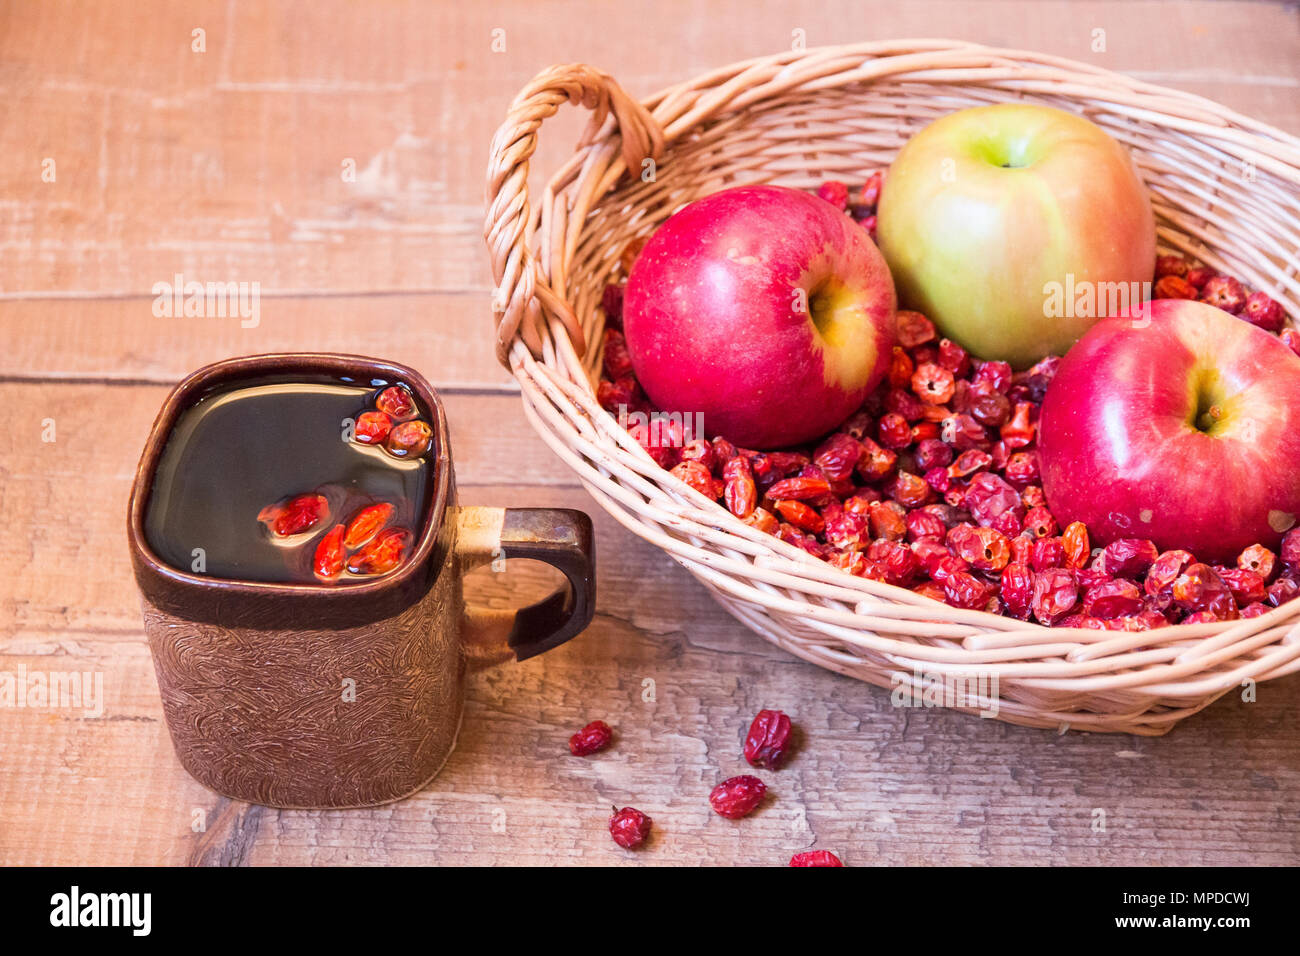 Mug Of Black Tea Rosehip Next To Wicker Basket Filled With Dried Wild Rose And Apples On Wooden Surface Stock Photo Alamy